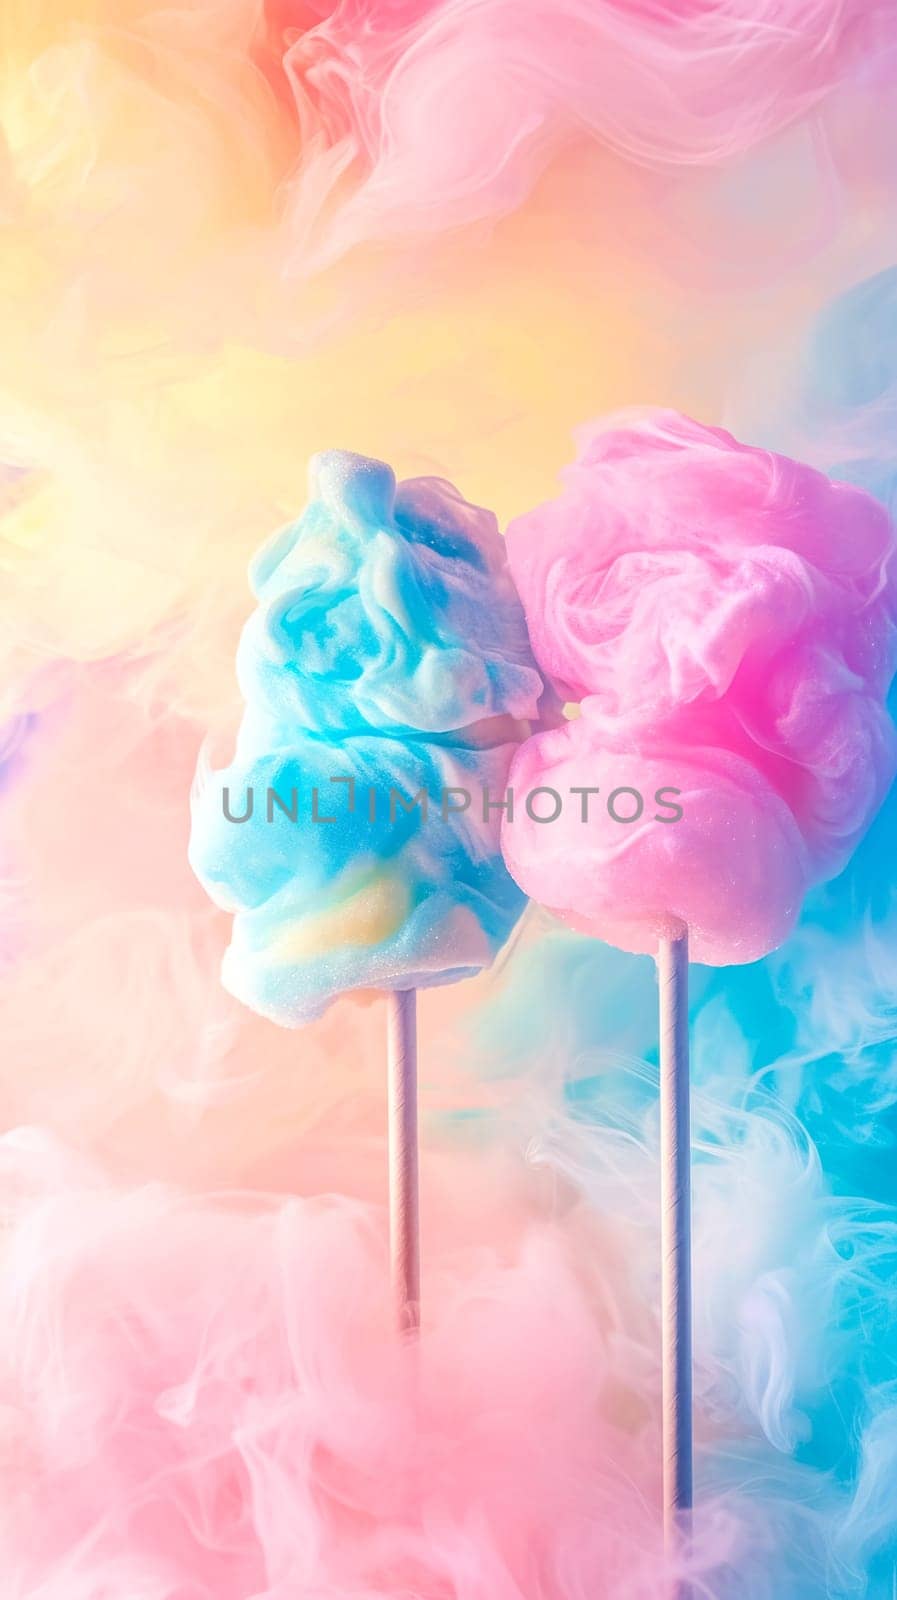 Whimsical candyfloss on sticks, colored in dreamy pink and blue hues, floats amidst a soft, pastel-colored smoke, creating a magical and playful atmosphere by Edophoto